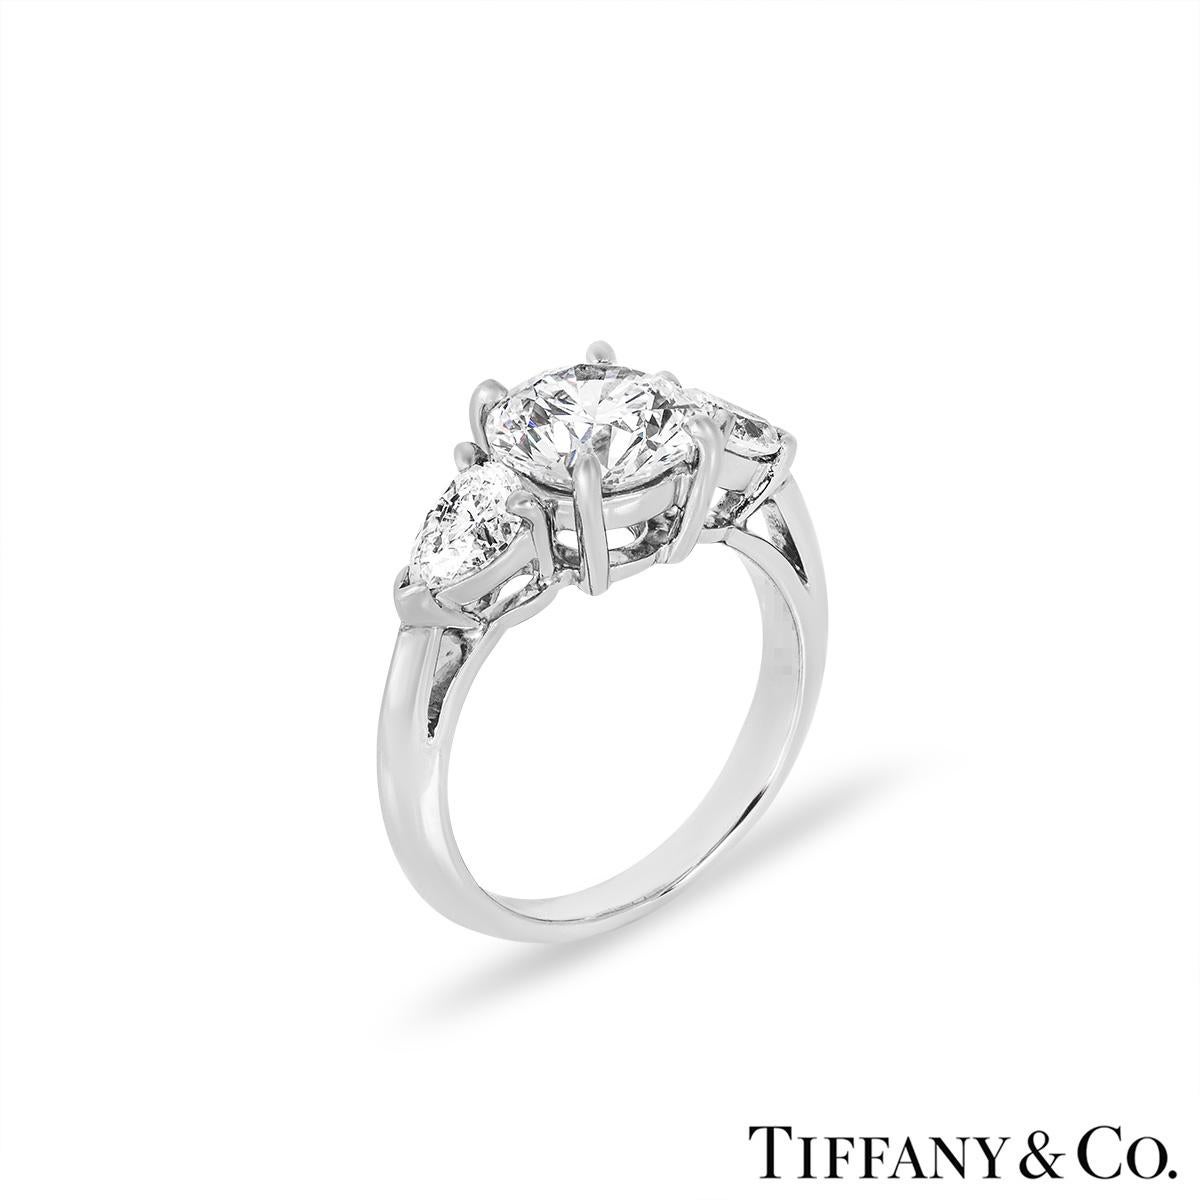 A stunning diamond engagement ring from Tiffany & Co. The three stone ring is set to the centre with a round brilliant cut diamond weighing 1.65ct, G colour and VVS2 clarity. The diamond scores an excellent rating in all three aspects for cut,